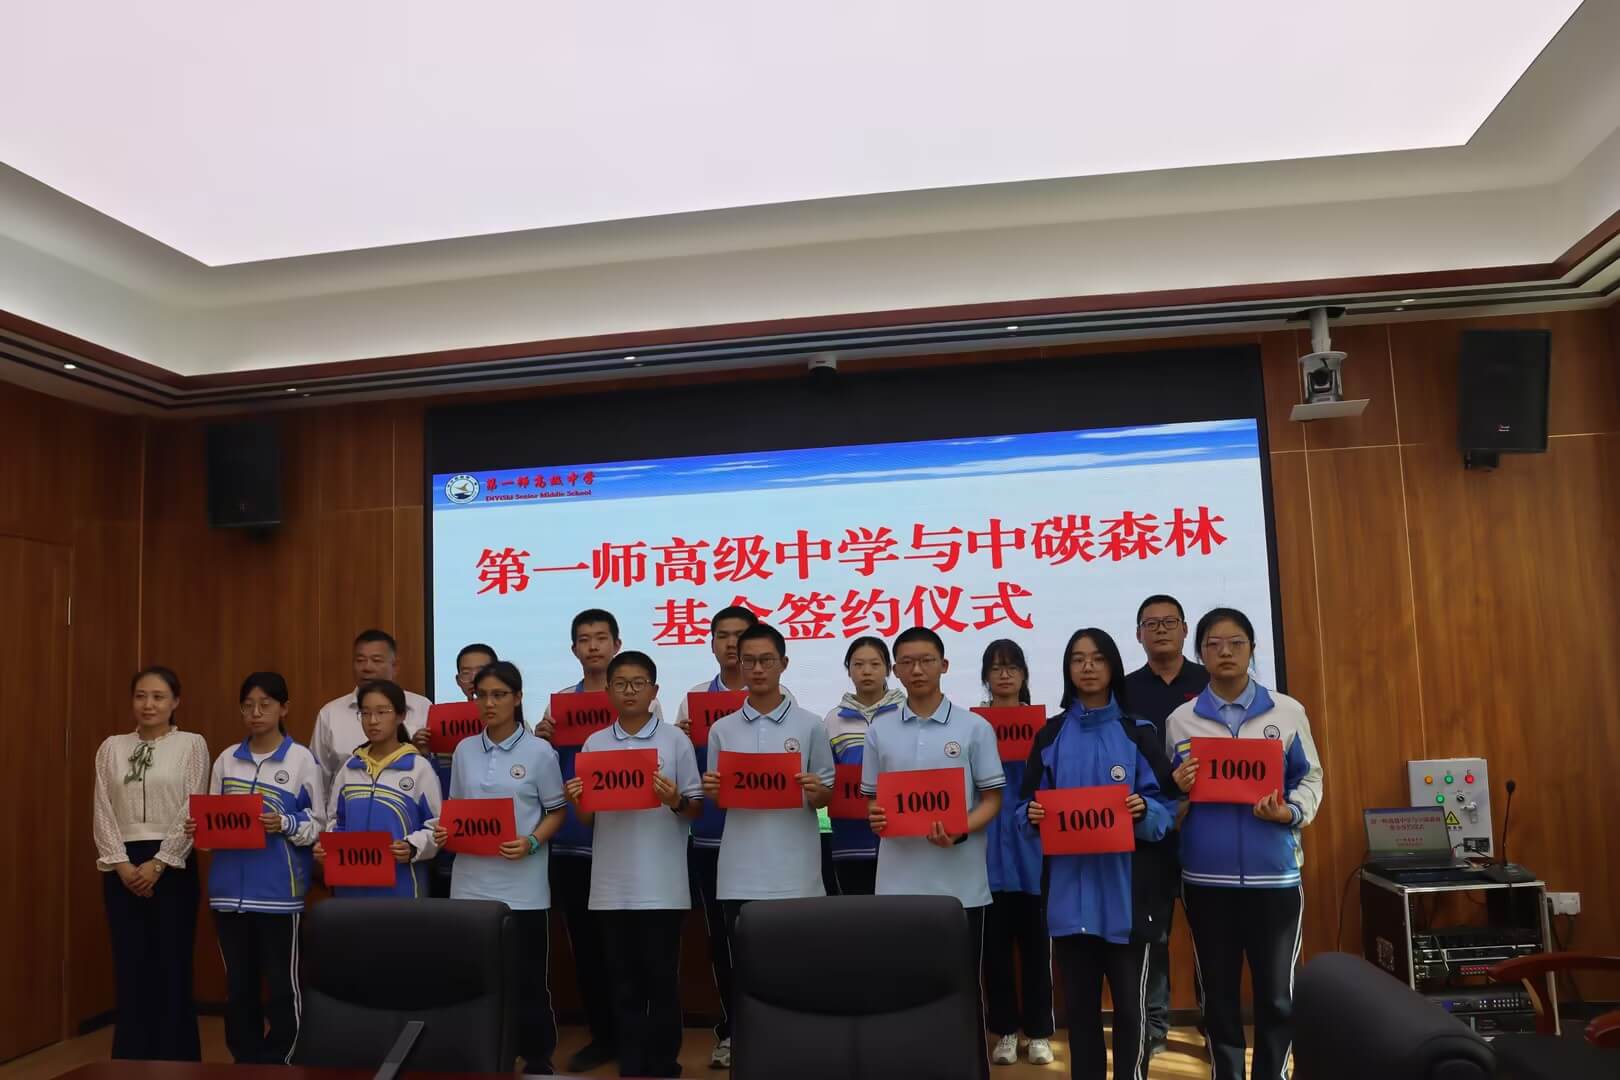 The First Division of the Xinjiang Production and Construction Corps held a ceremony for the donation of the Zhongtan Forest Education Foundation.